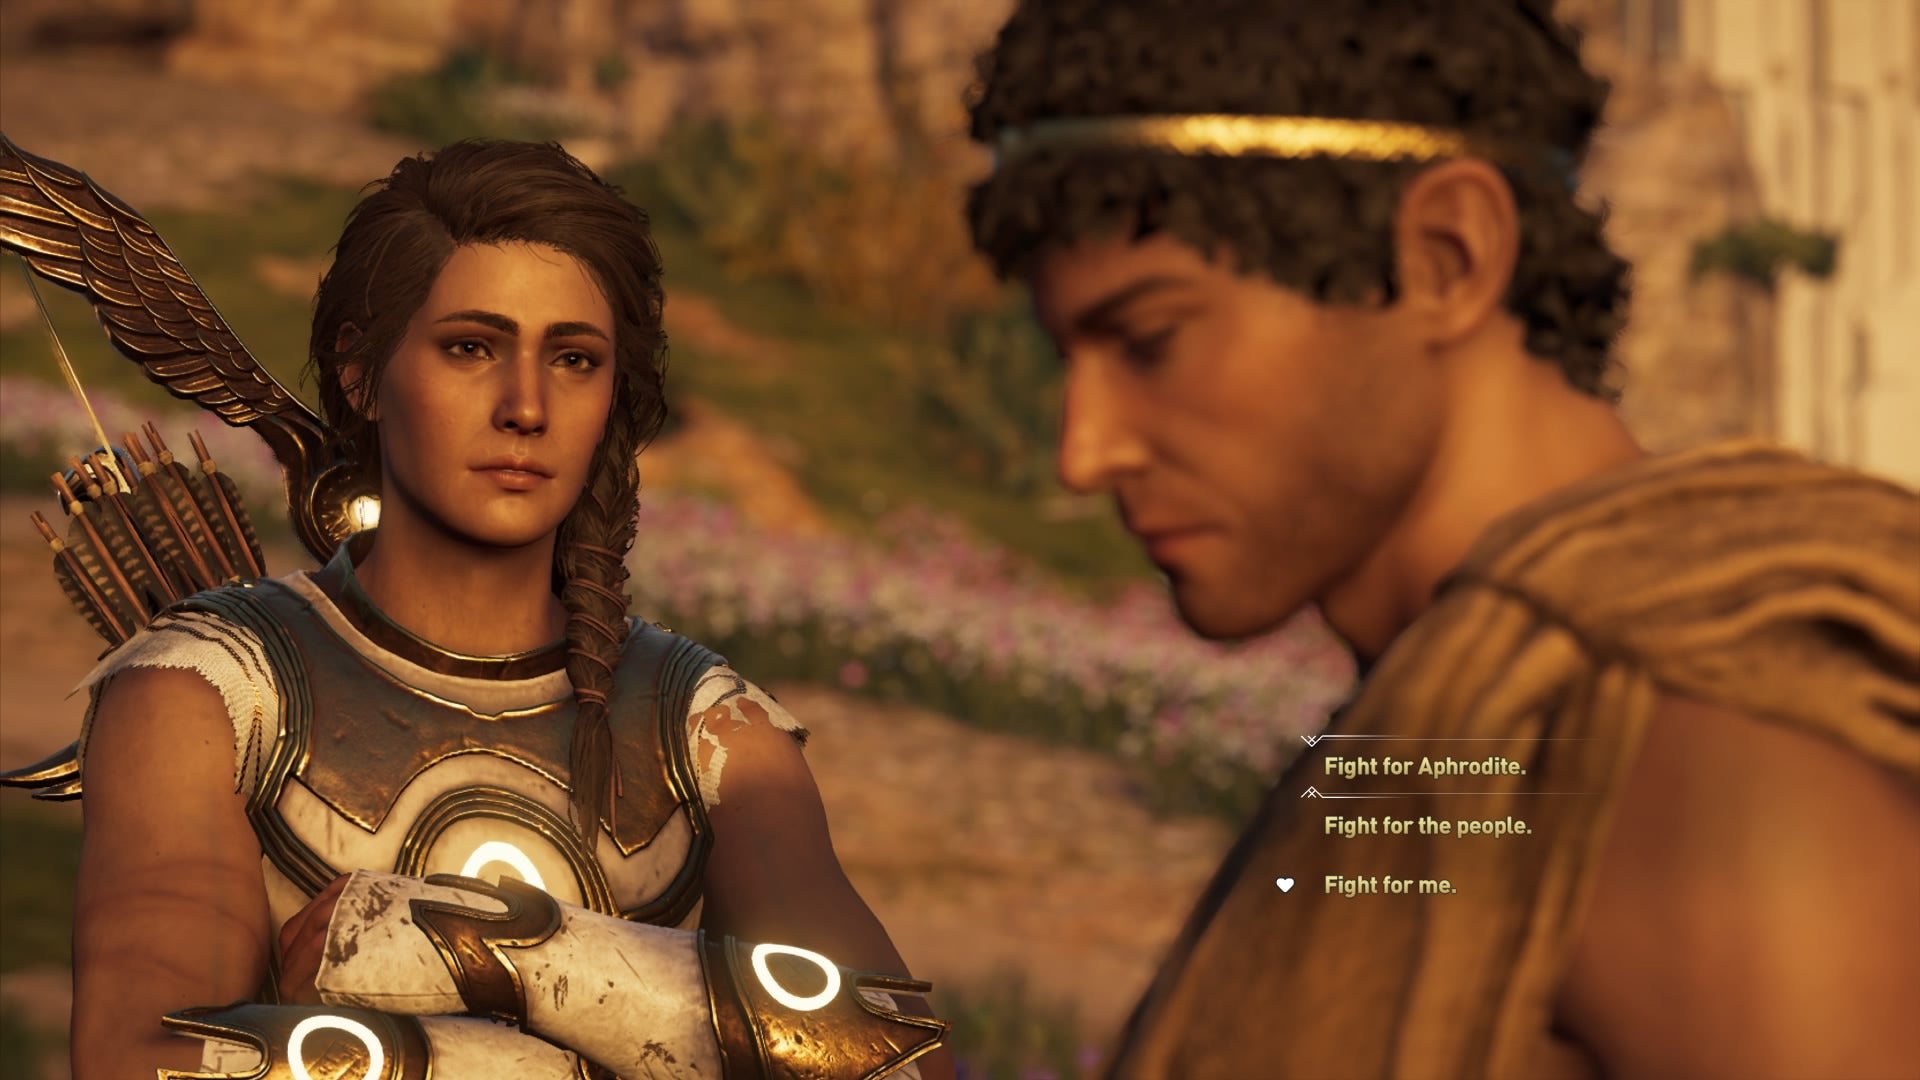 Image for The first episode of Assassin's Creed Odyssey: The Fate of Atlantis DLC is free until September